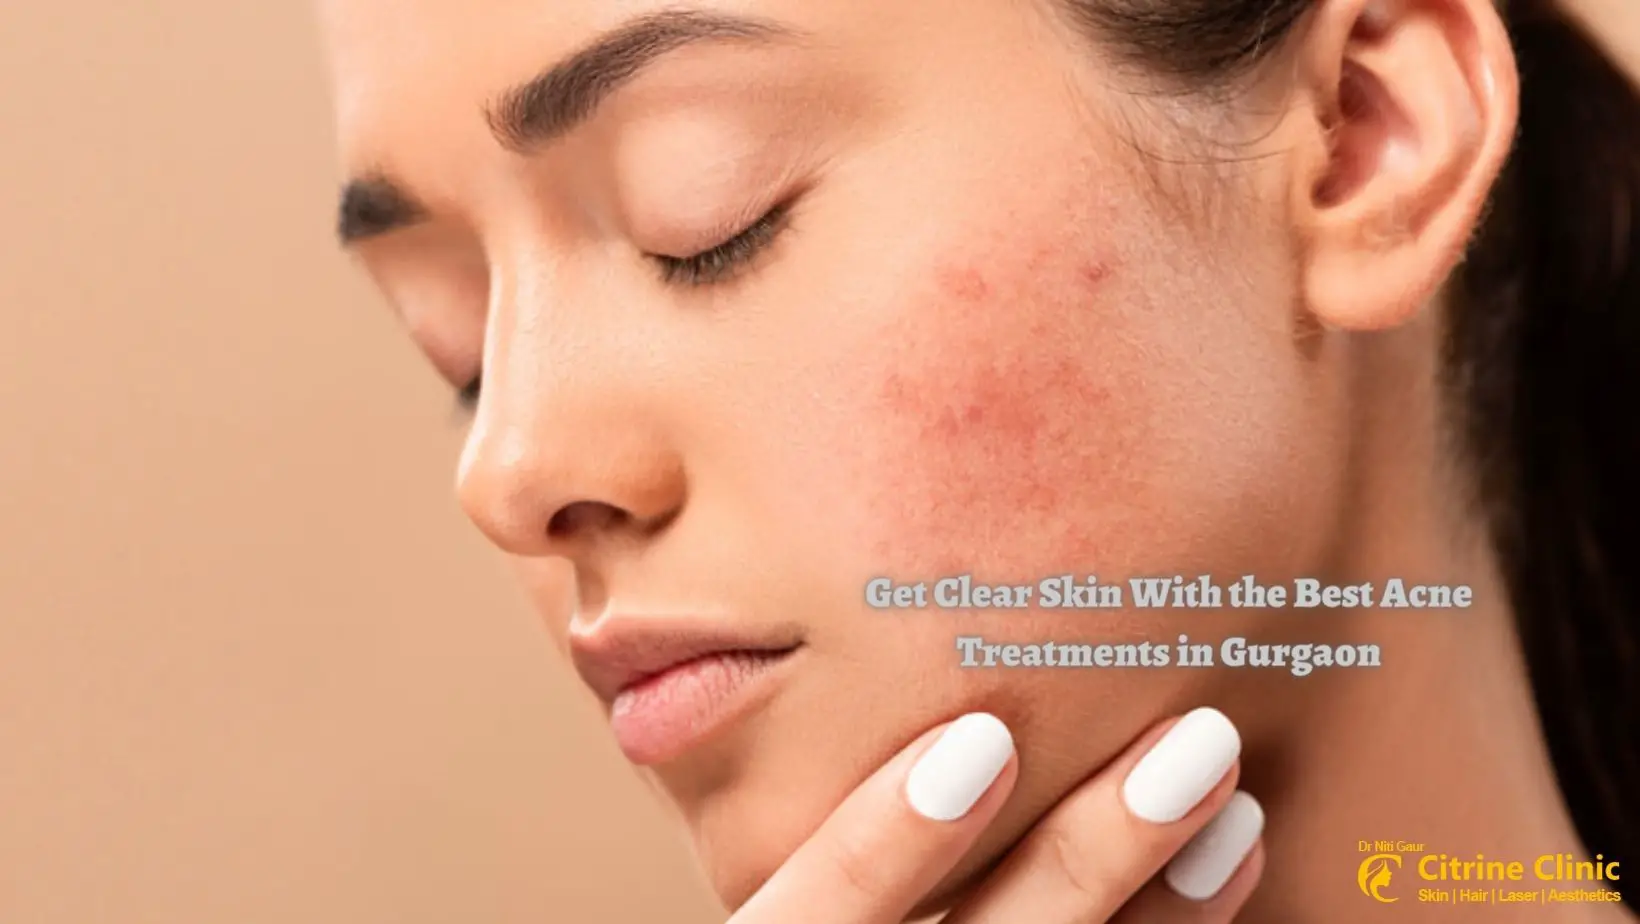 Get Clear Skin With Best Acne Treatments in Gurgaon